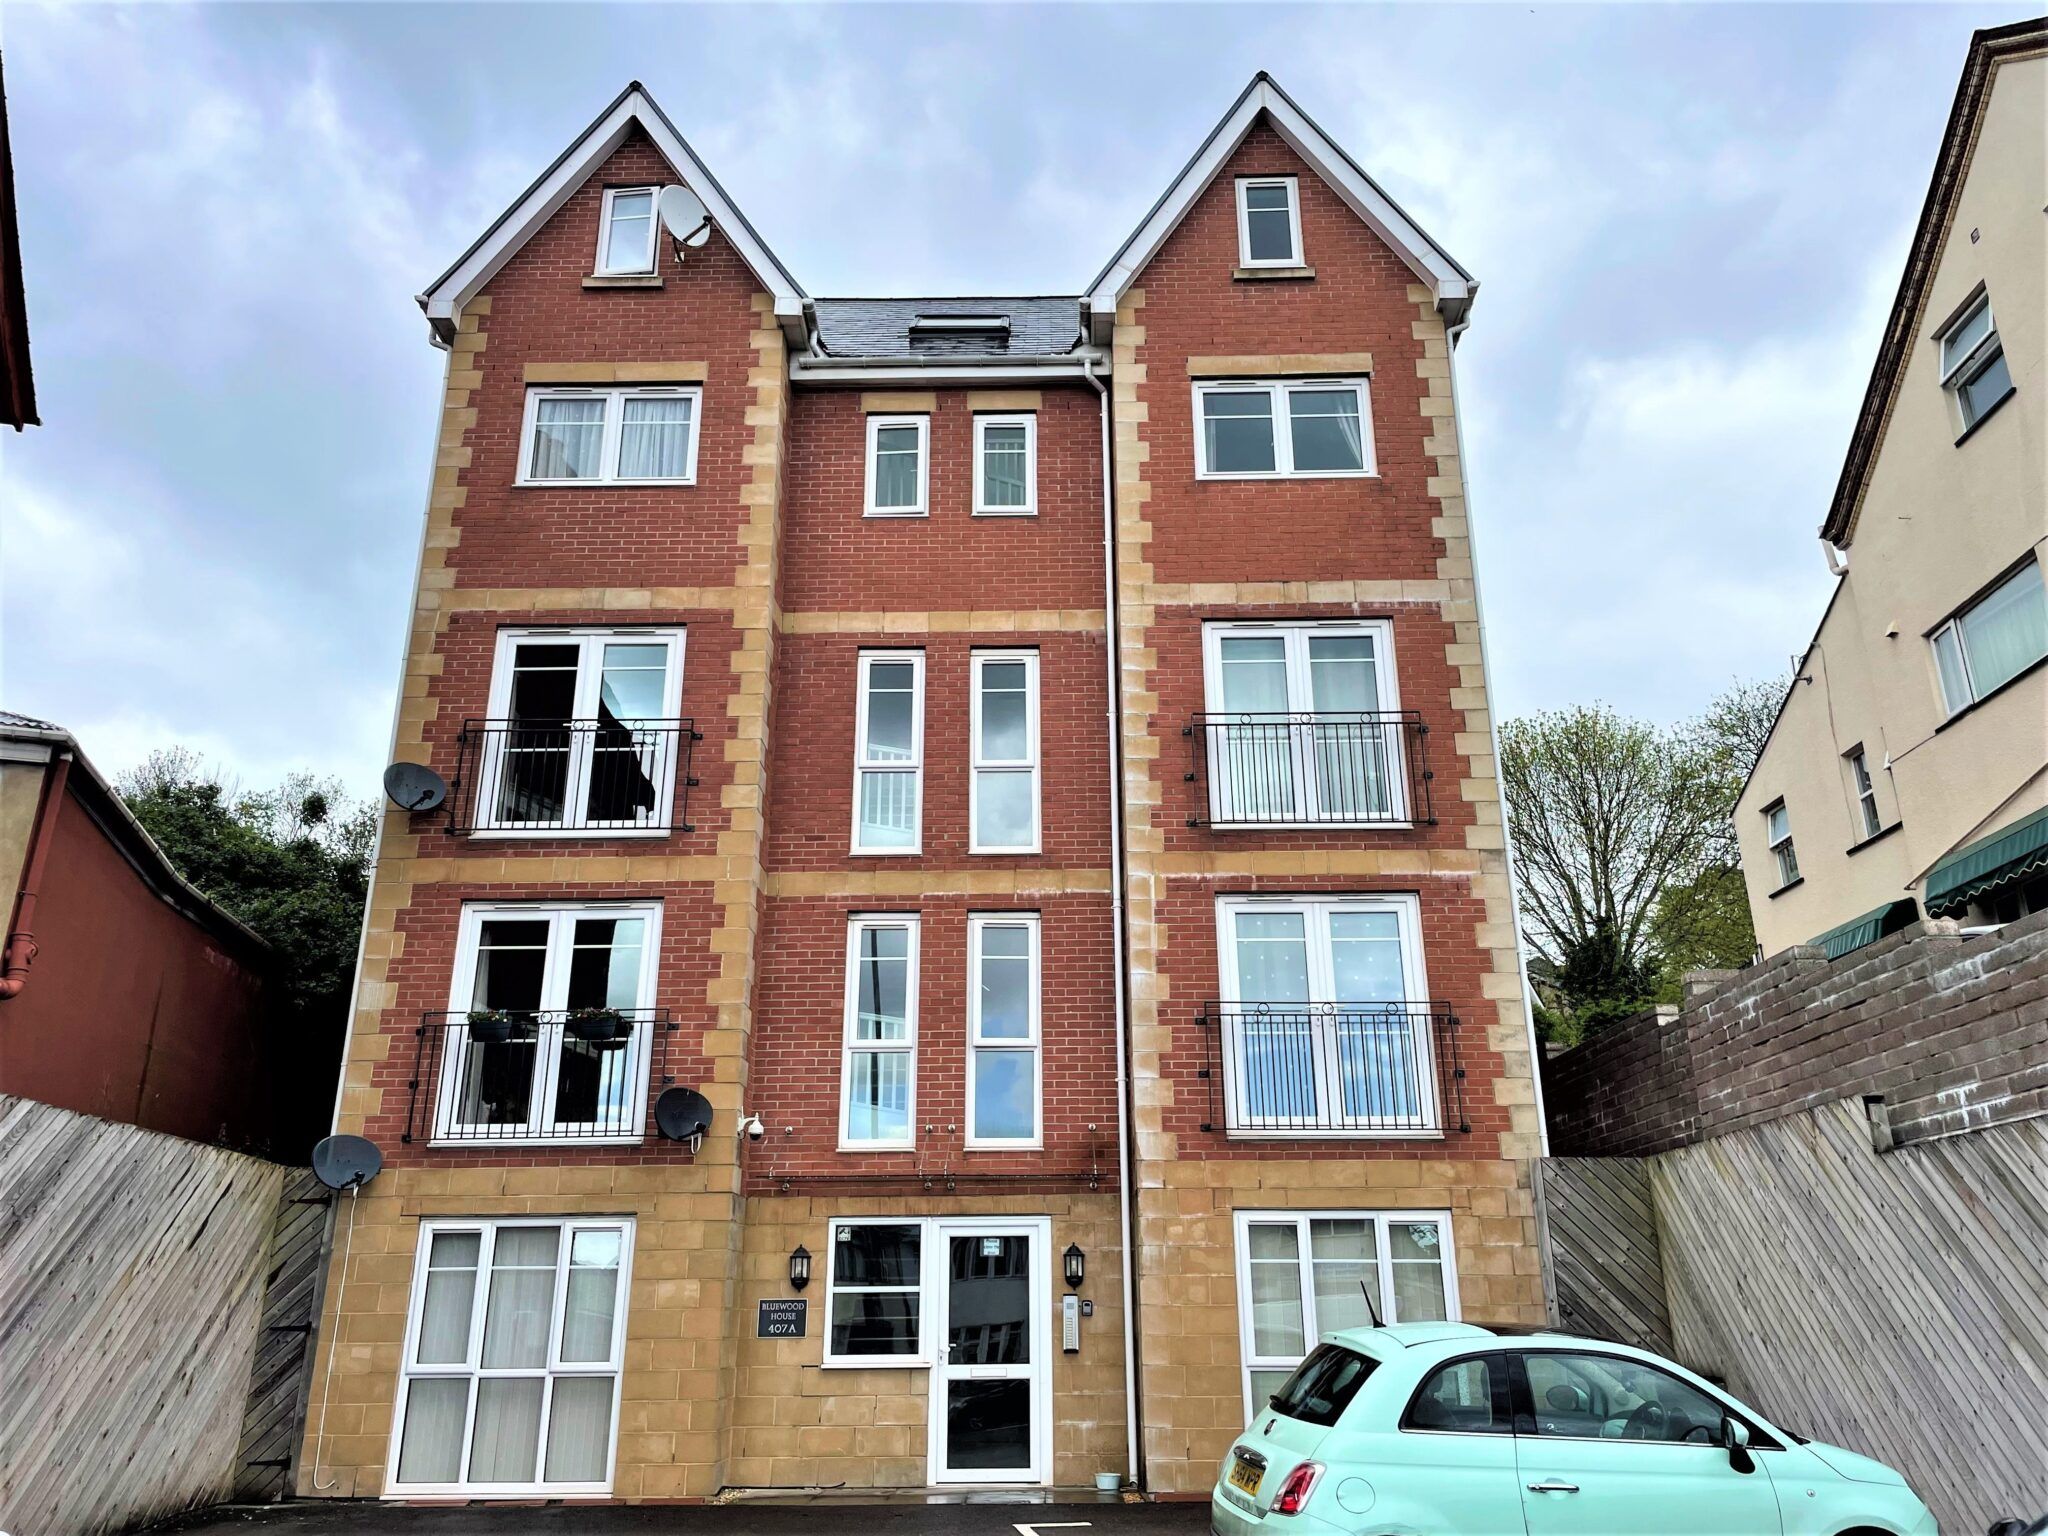 Chepstow Road, Bluewood House, Newport, NP19 8HL